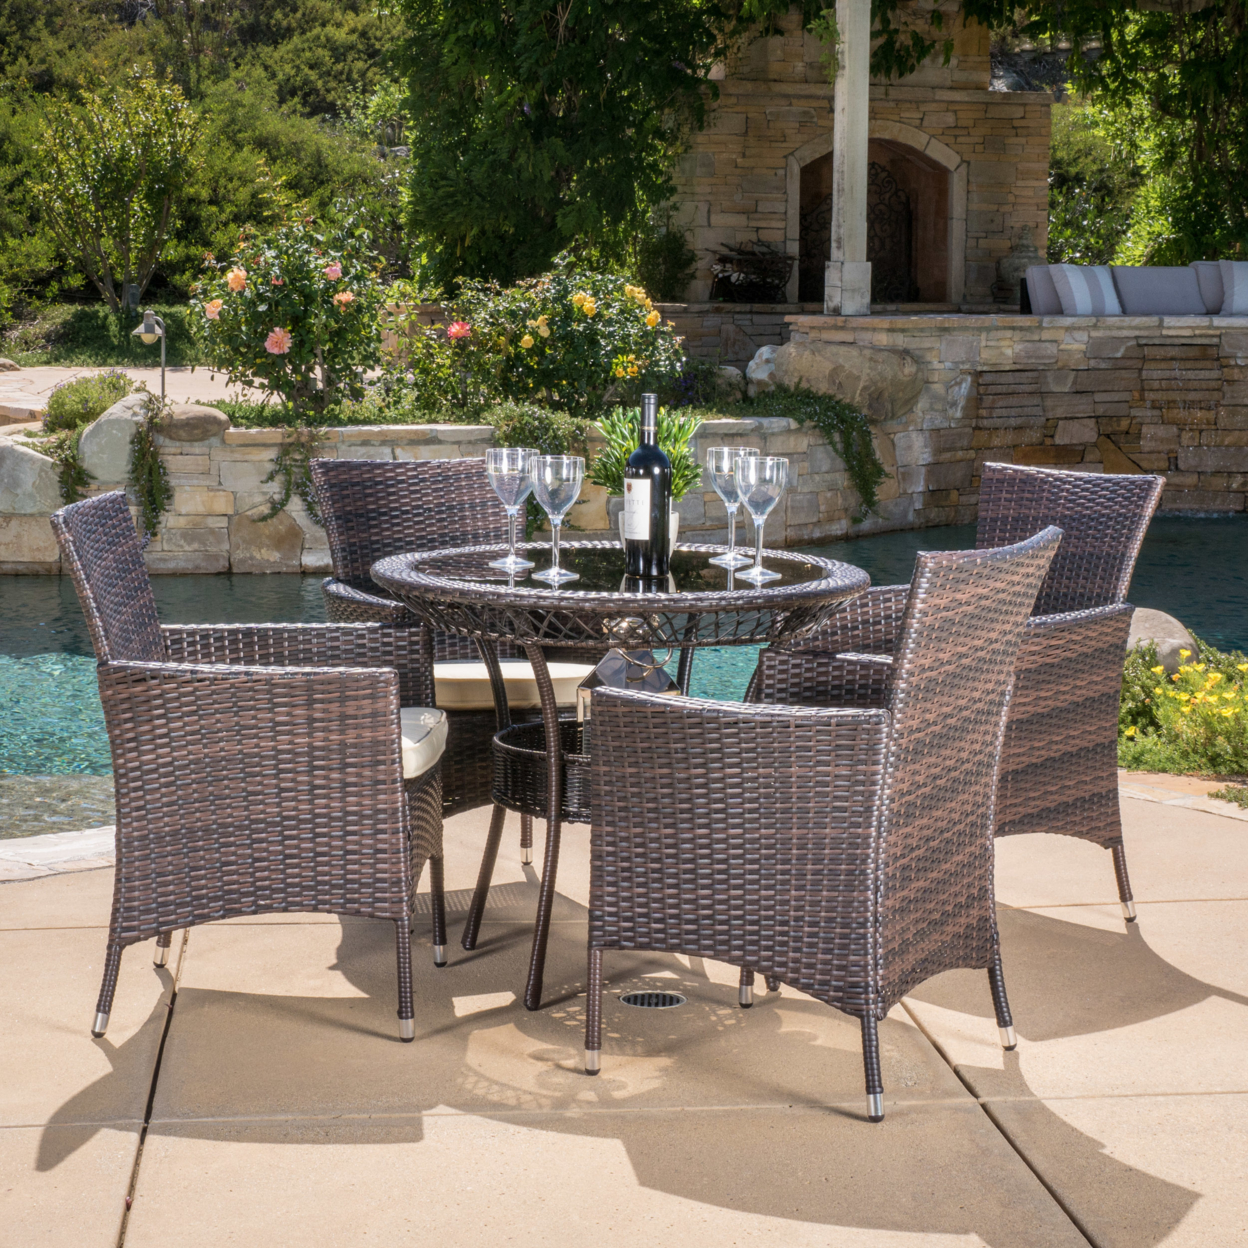 Clementine Outdoor Multibrown Wicker 5pc Dining Set